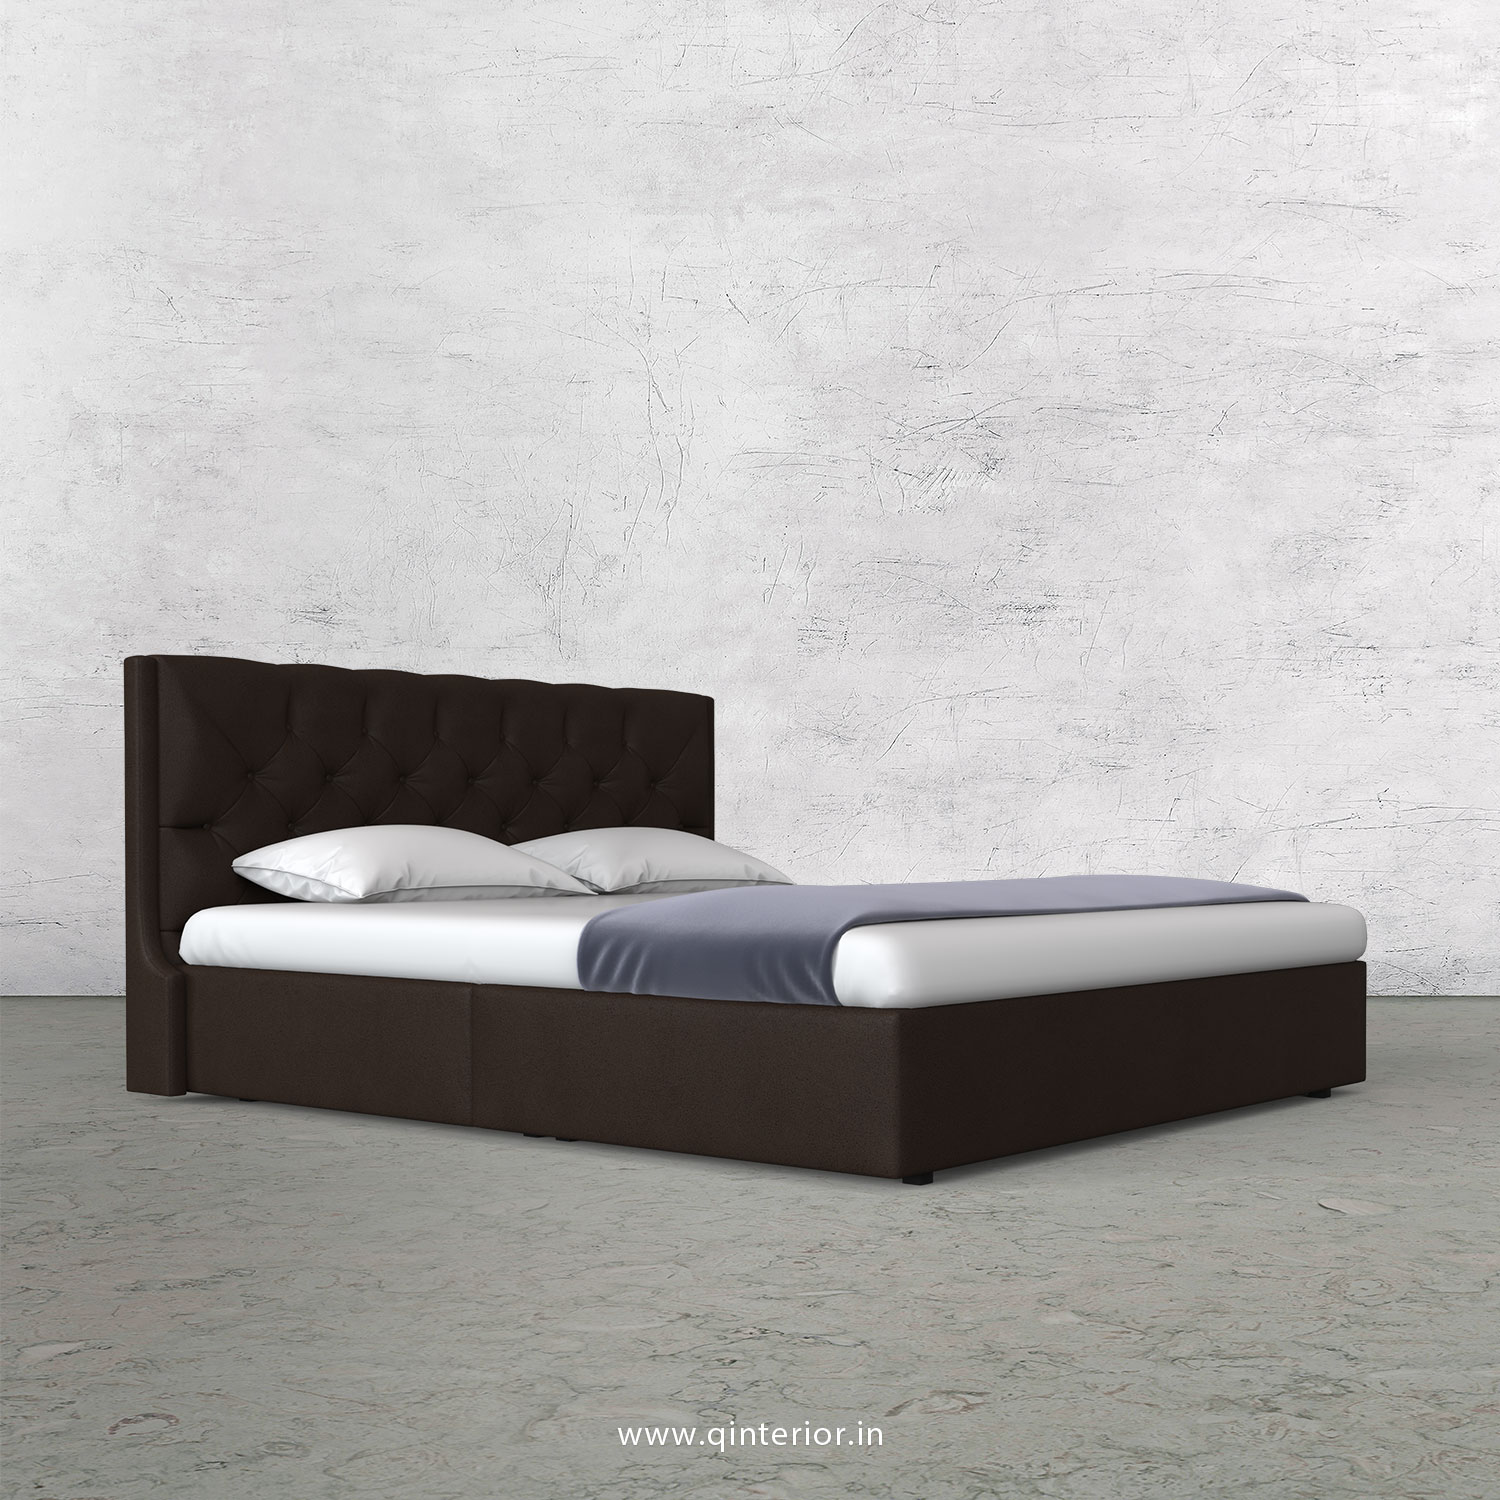 Scorpius Queen Bed in Fab Leather Fabric - QBD009 FL16